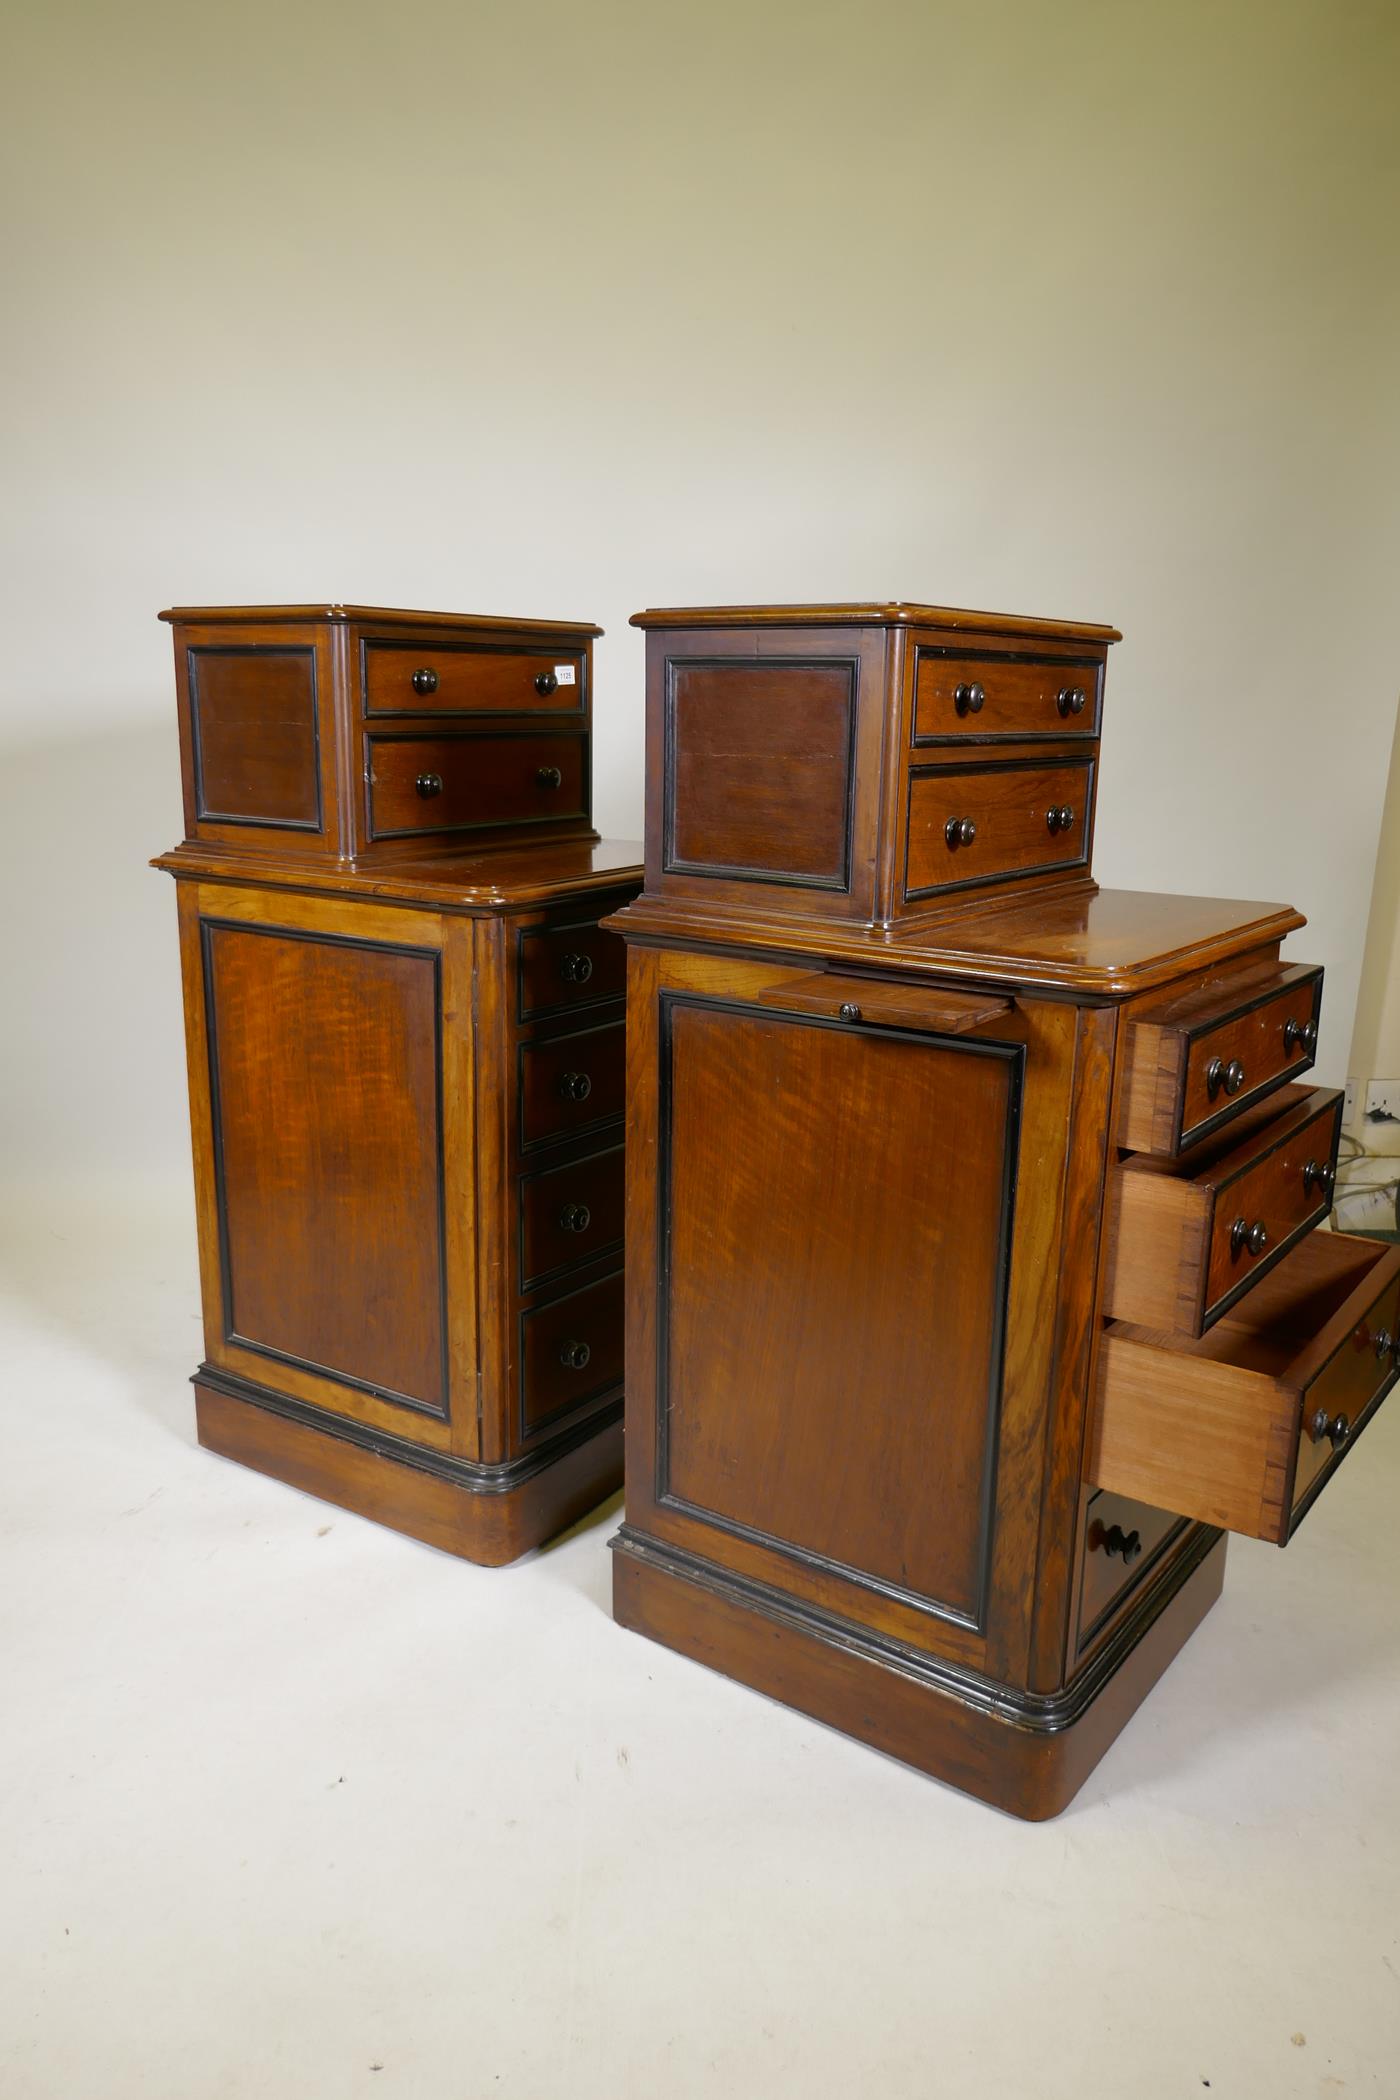 A pair of C19th walnut cabinets with ebony mouldings, one with six drawers, the other two drawers - Image 5 of 8